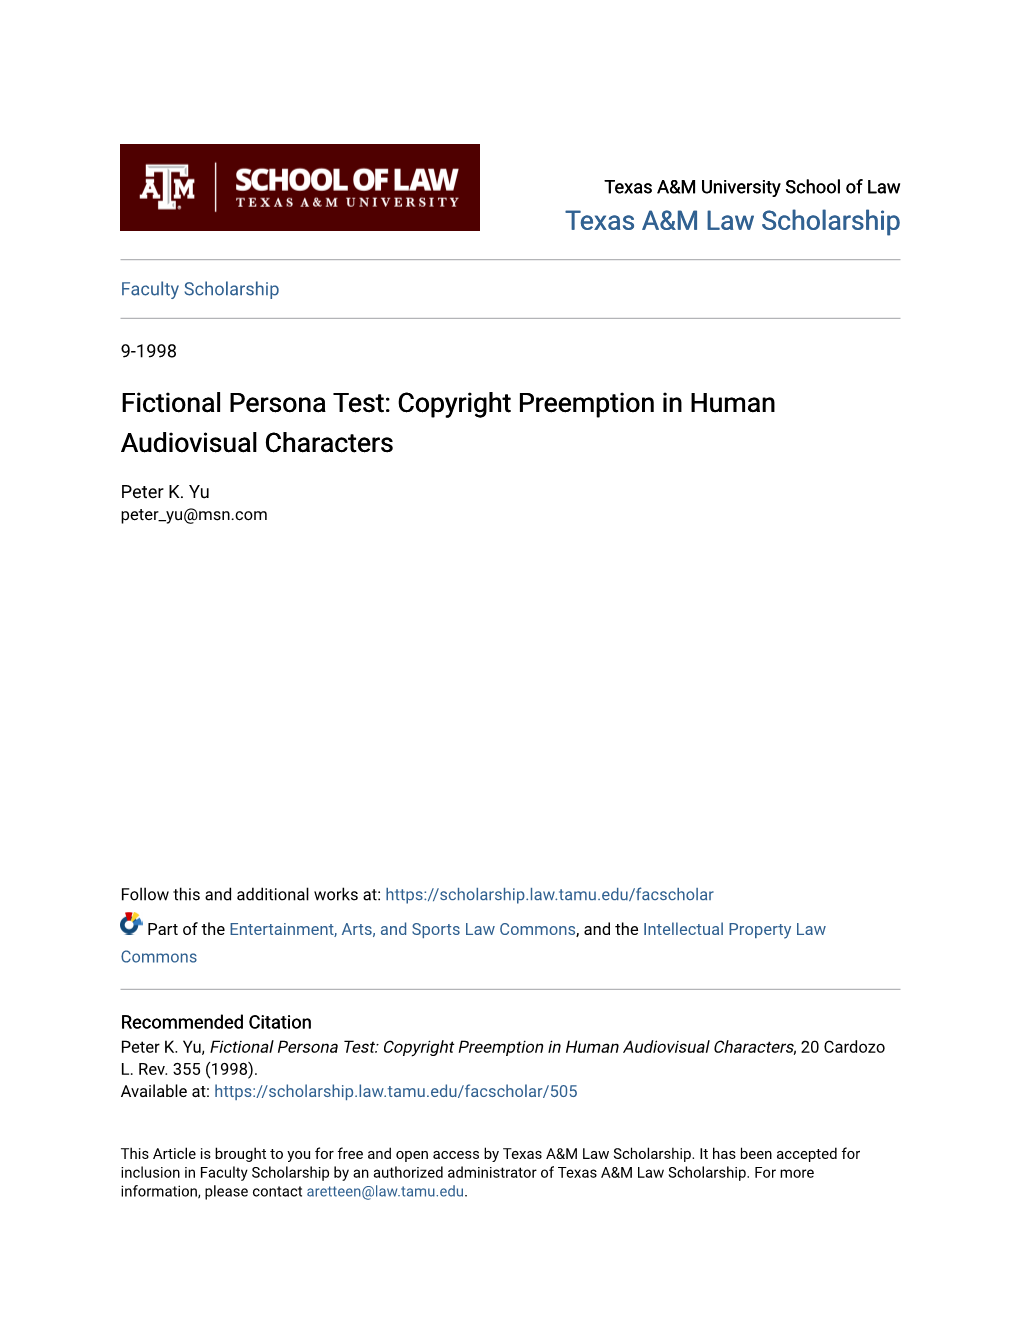 Fictional Persona Test: Copyright Preemption in Human Audiovisual Characters